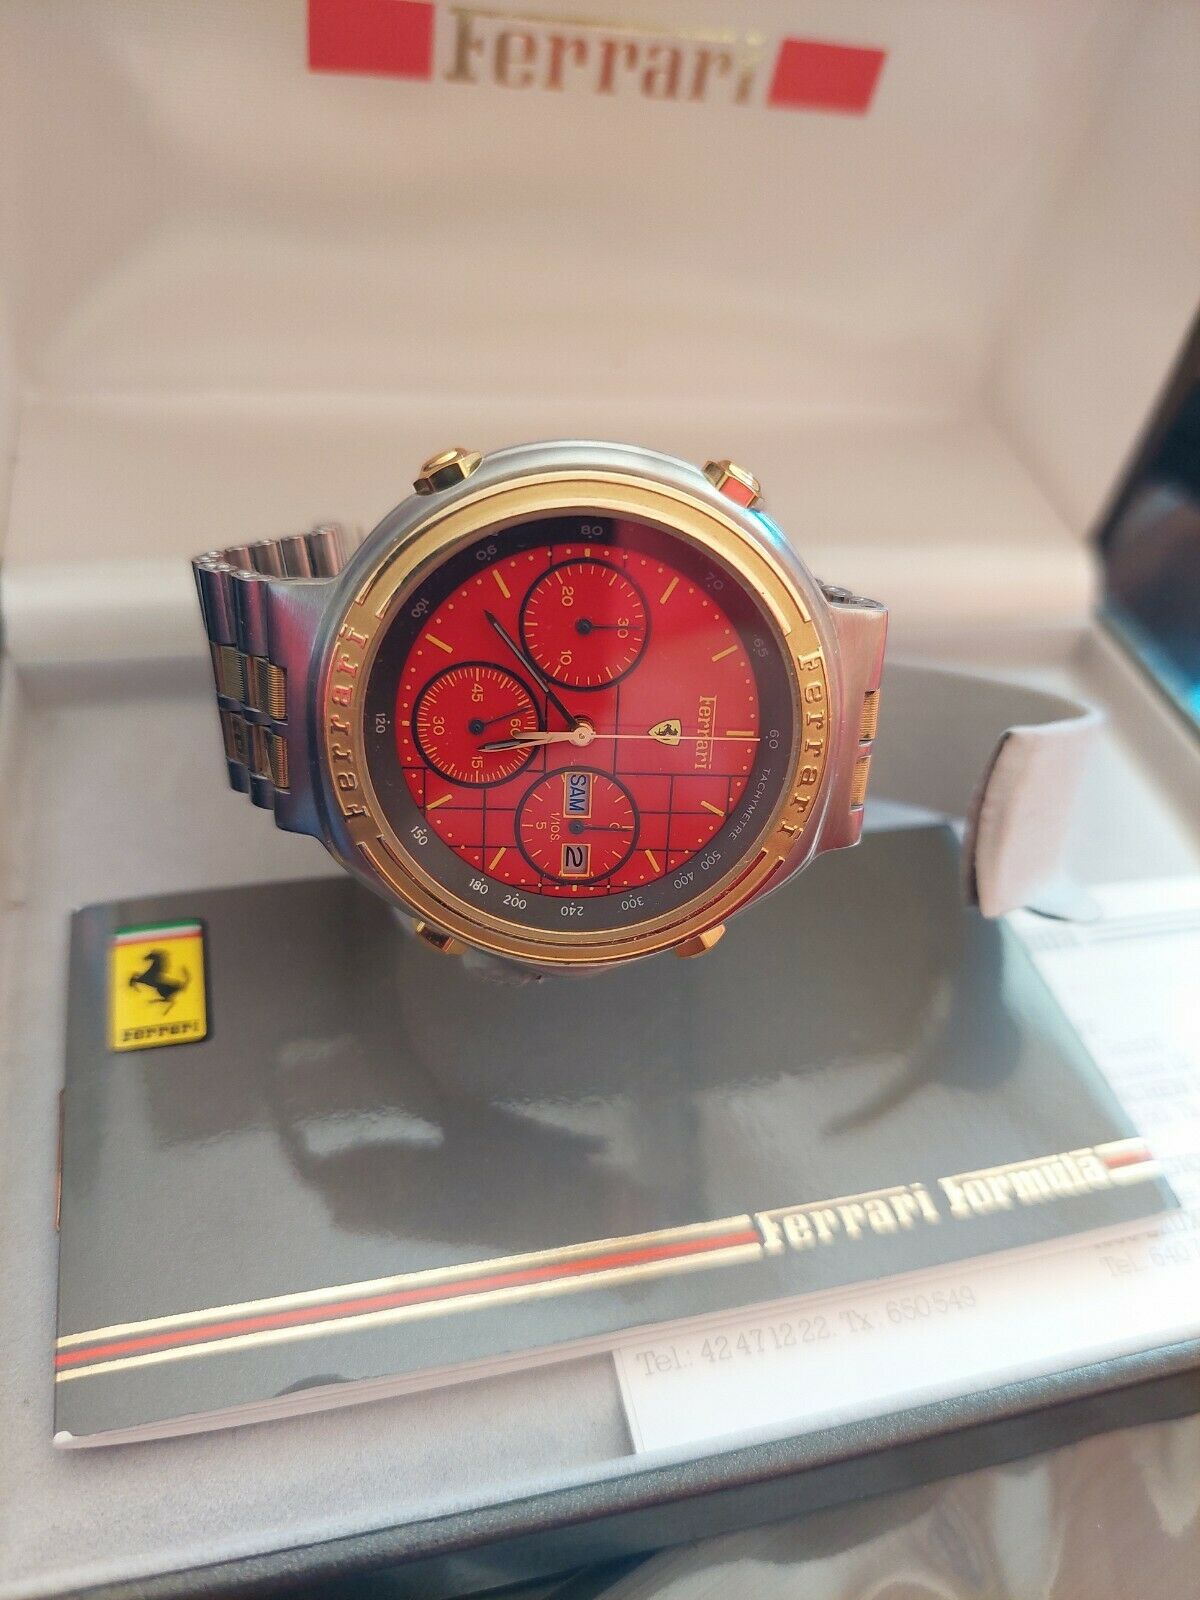 CartierFF-7A38-Stainless+Gold-RedFace-eBay(Germany)-Sept2021-Another-2.jpg